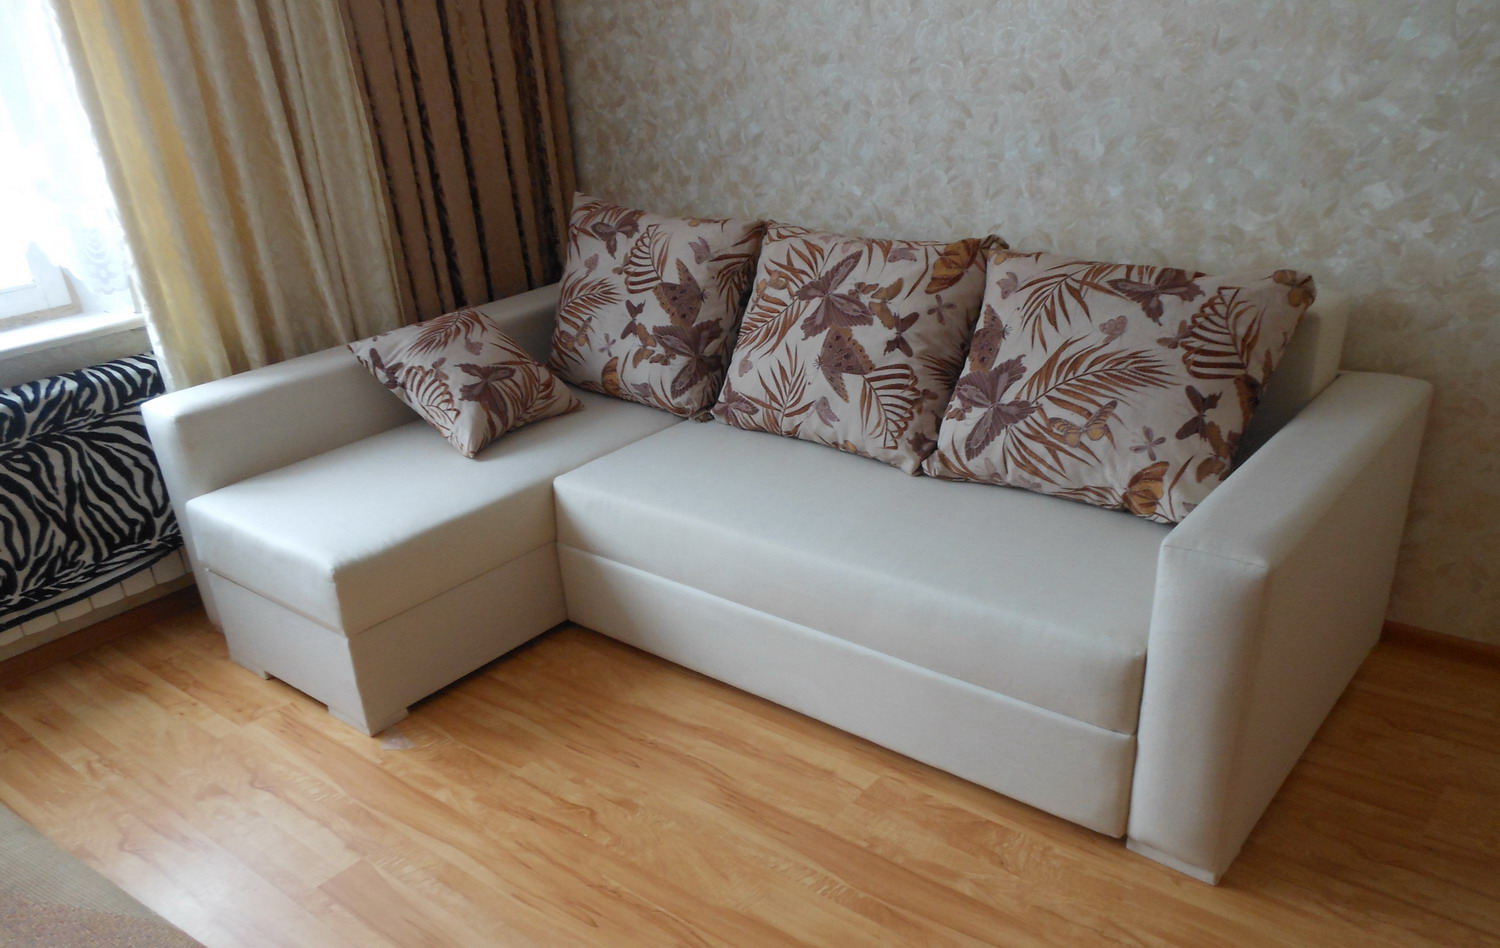 leather corner sofa in the style of the apartment